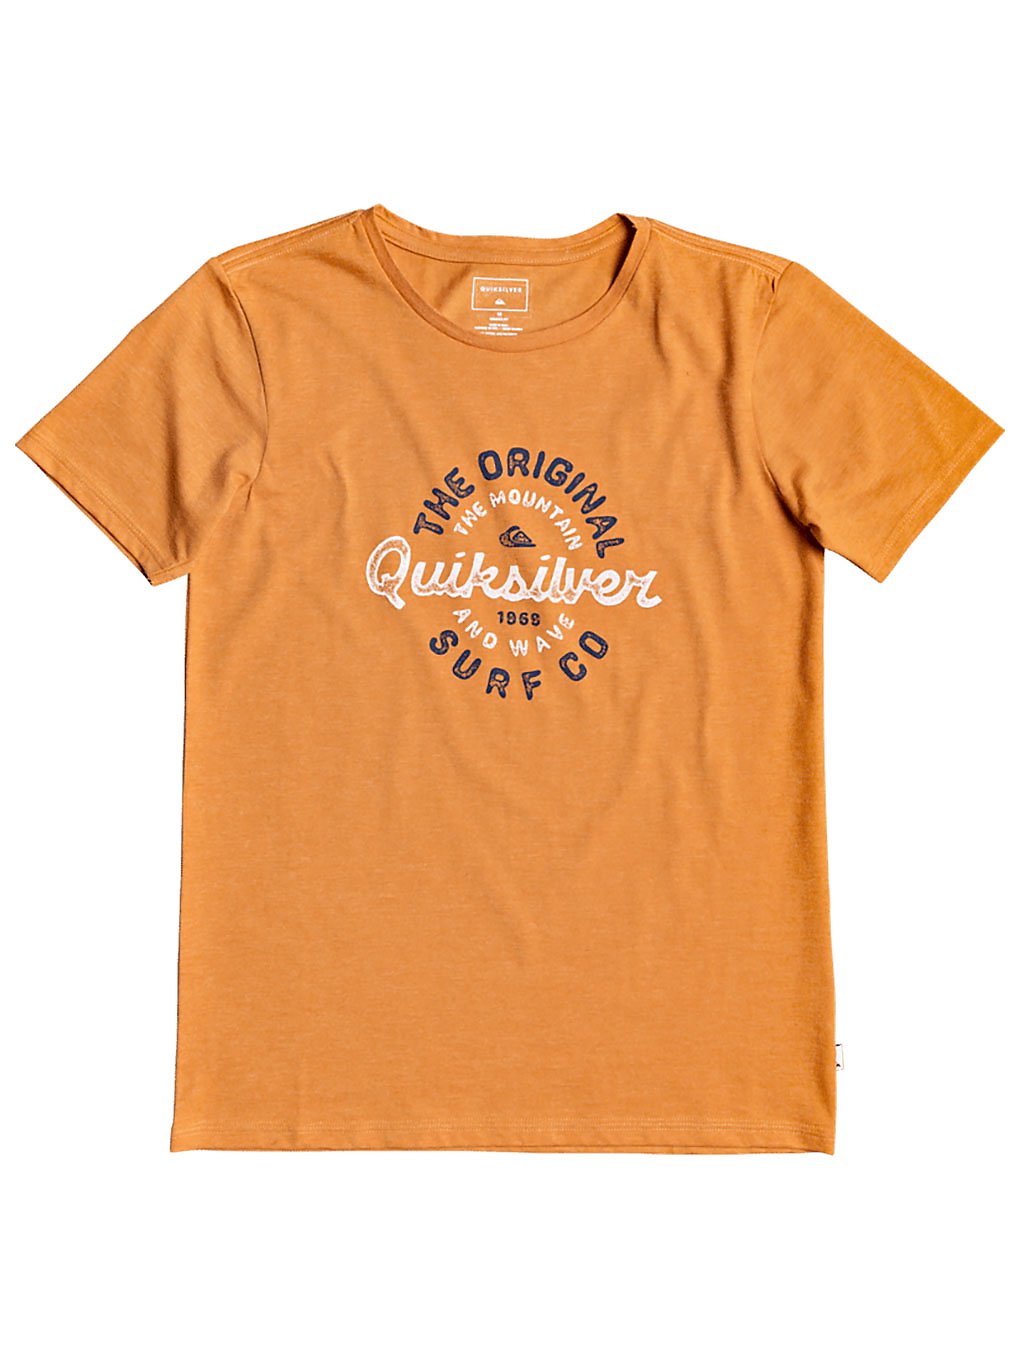 Quiksilver Motorcycle Emptiness T-Shirt apricot buff heather